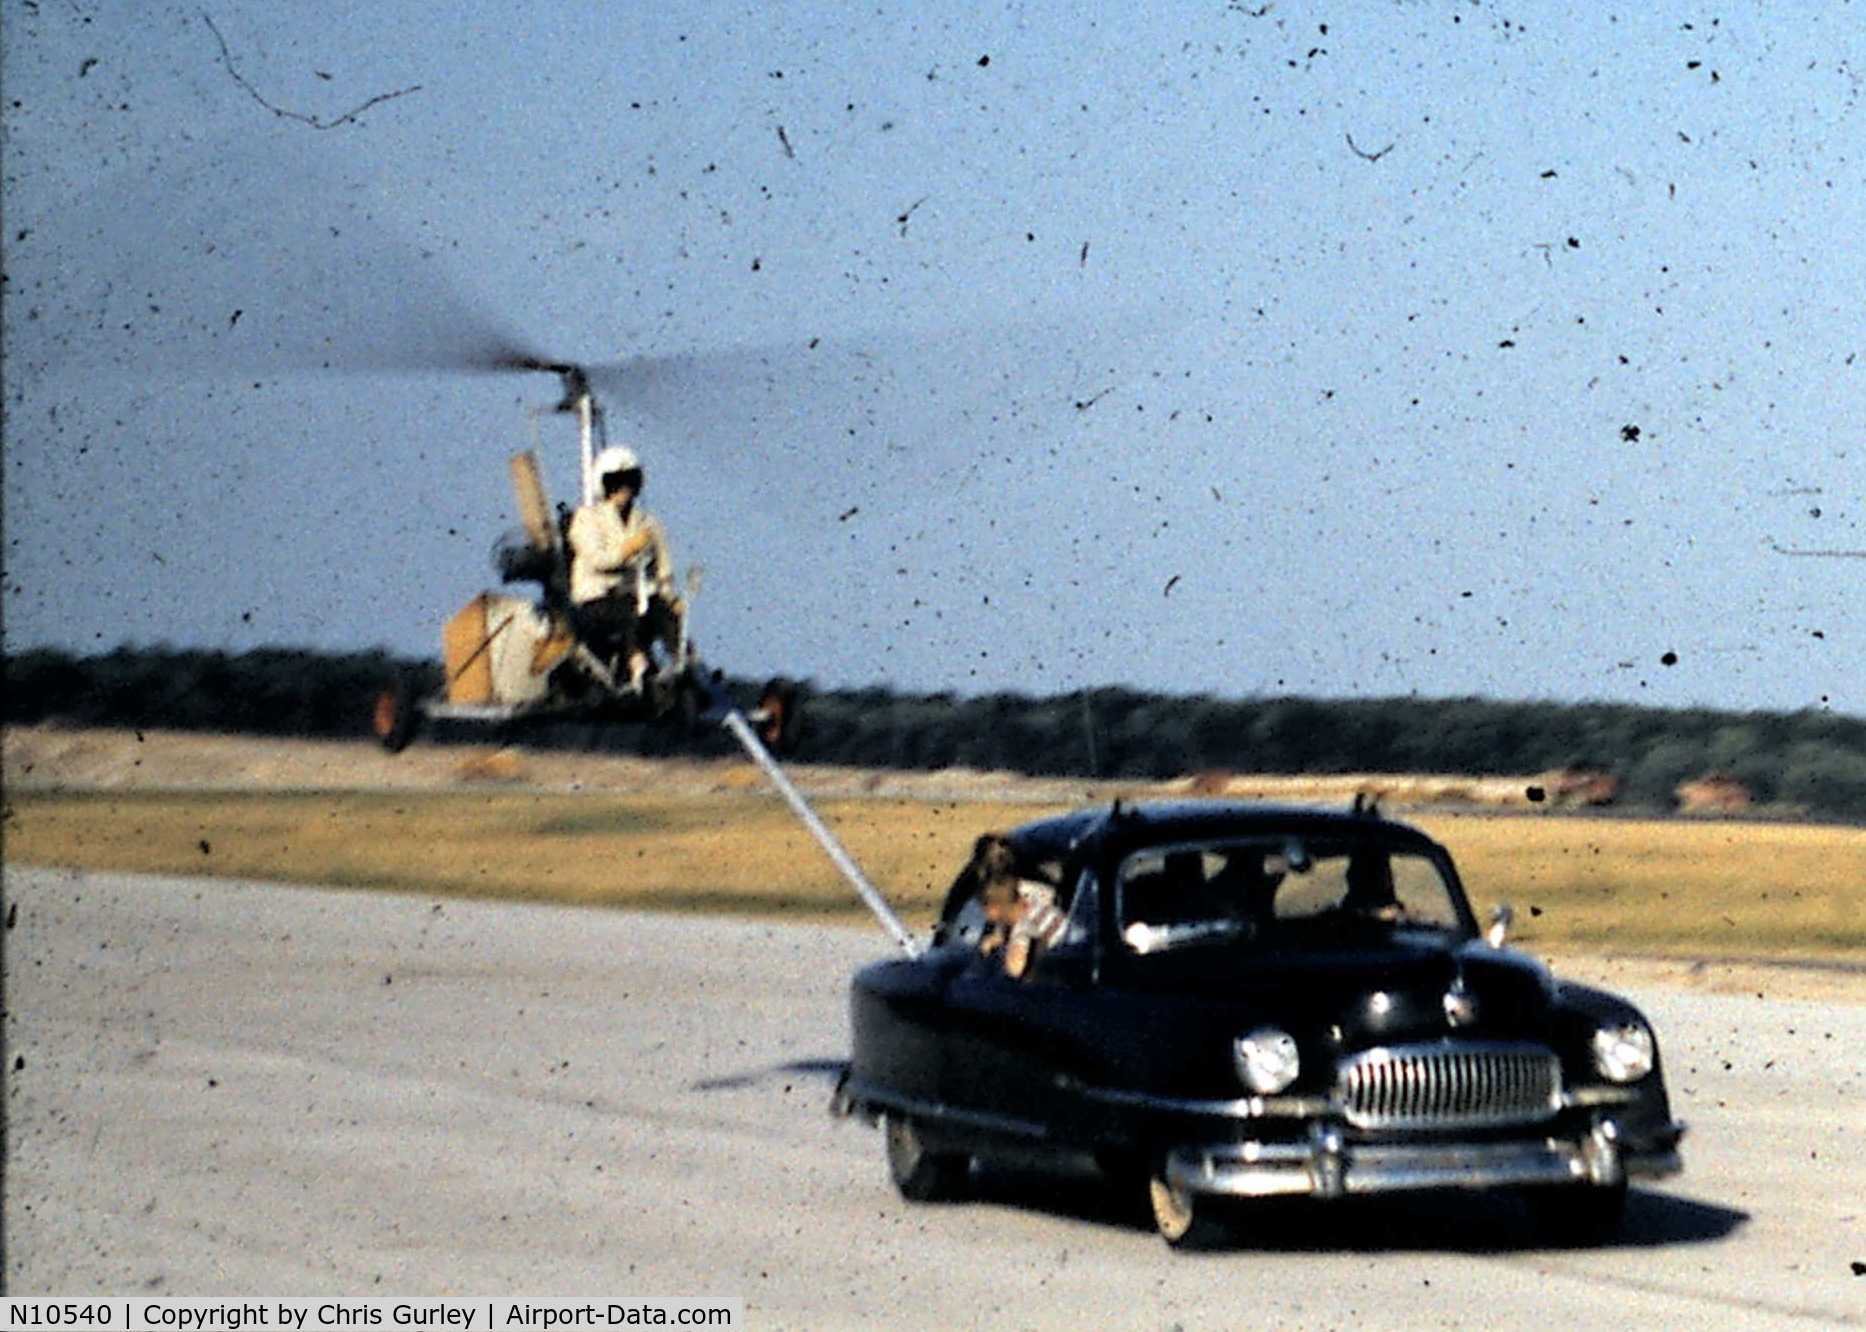 N10540, 1957 Ramsey GURLEY BIRD GB-1 C/N 001, Pictures of Commander M. L. Gurley’s “Gurley Bird” taken at South Weymouth Naval Air Station. My mother wanted to fly it but the furthest my dad let her go was to be towed down the runway behind his 1951 Nash Rambler.